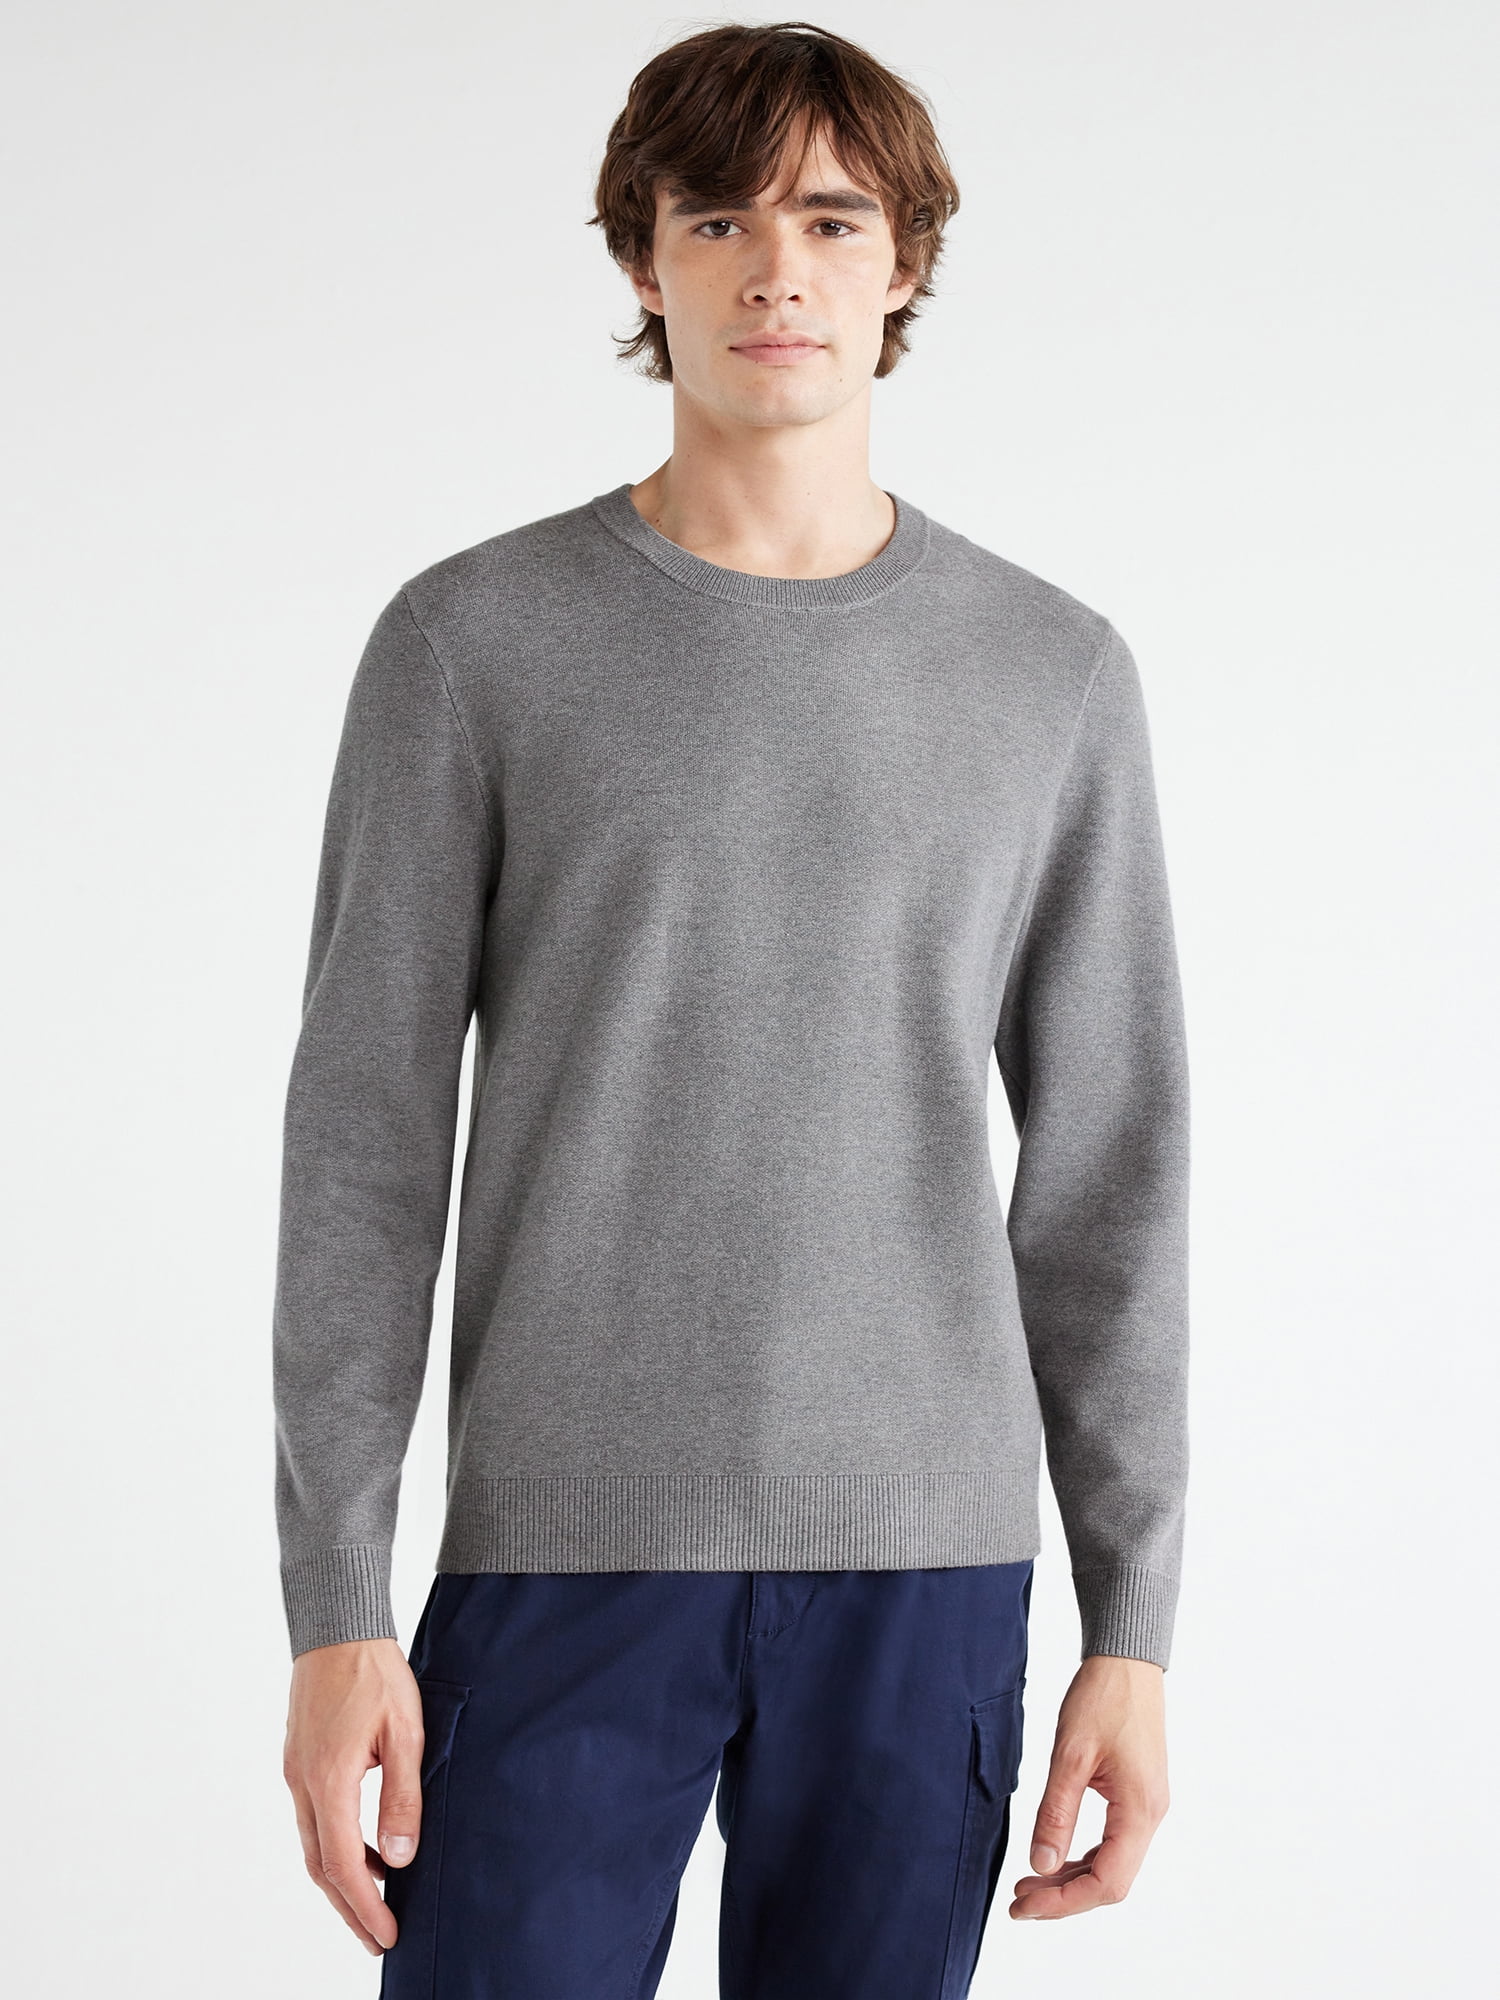 Free Assembly Men's Solid Crewneck Sweater with Long Sleeves, Sizes XS ...